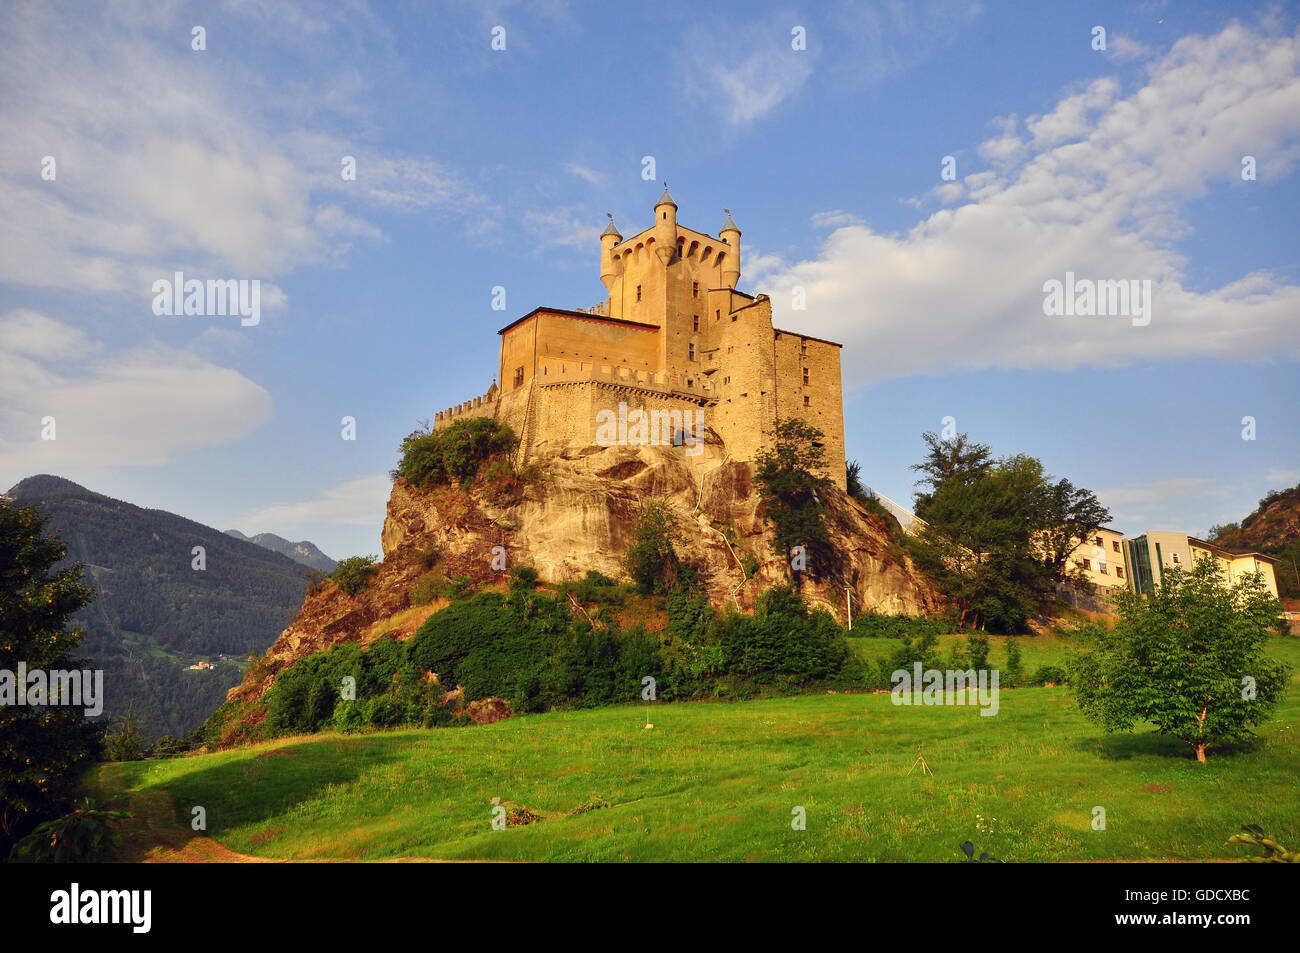 SAINT PIERRE, ITALY - JULY 3: Ancient castle in Saint Pierre town on July 3, 2015. Stock Photo